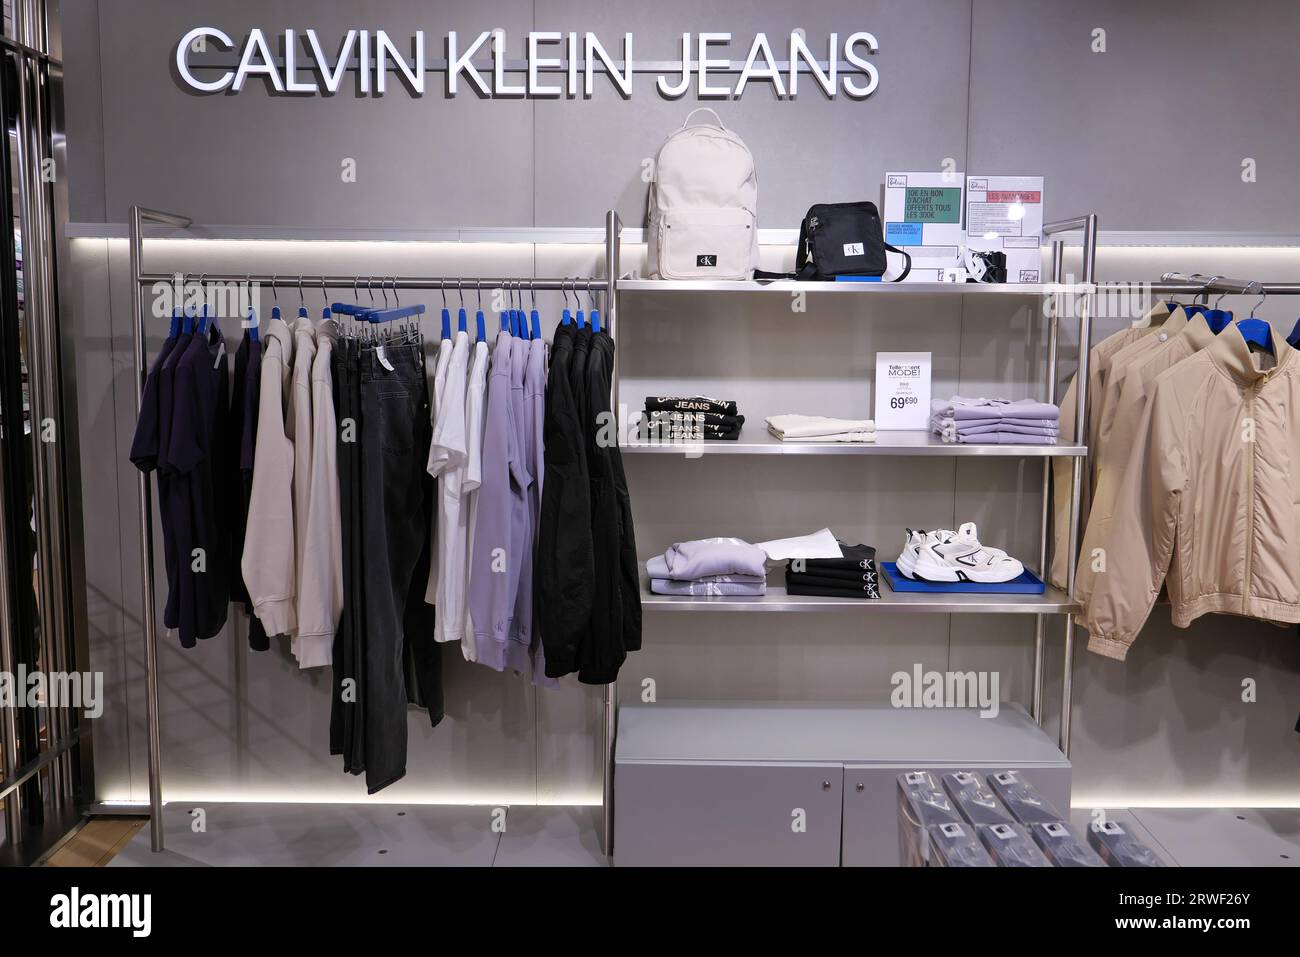 CALVIN KLEIN JEANS CLOTHING ON DISPLAY INSIDE THE FASHION STORE Stock Photo  - Alamy